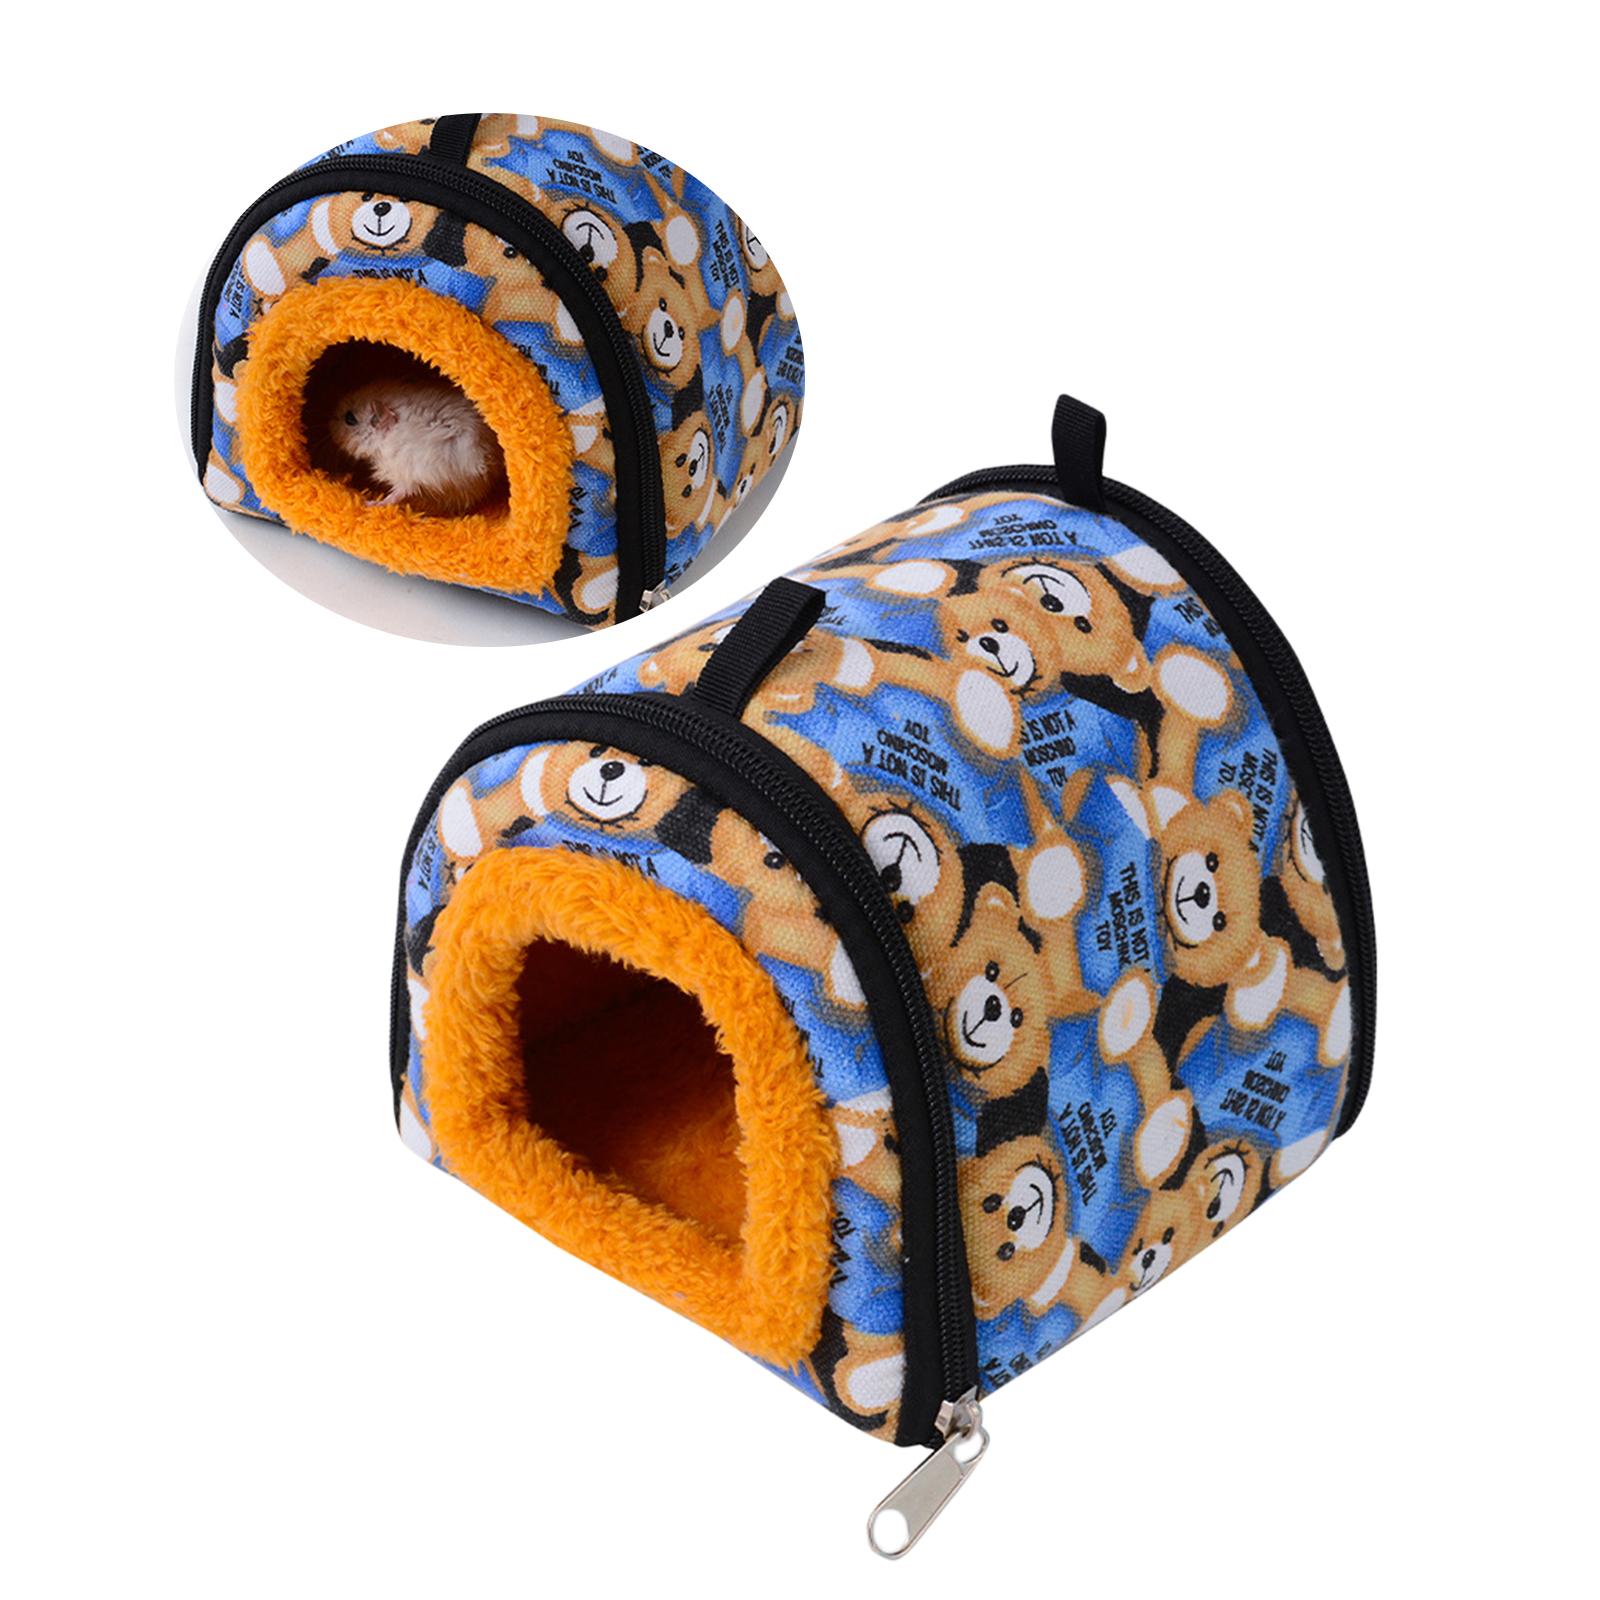 Guinea Pig Bed Nest Hamster House for Sugar Glider Rabbit Small Pet Supplies Blue Bear S